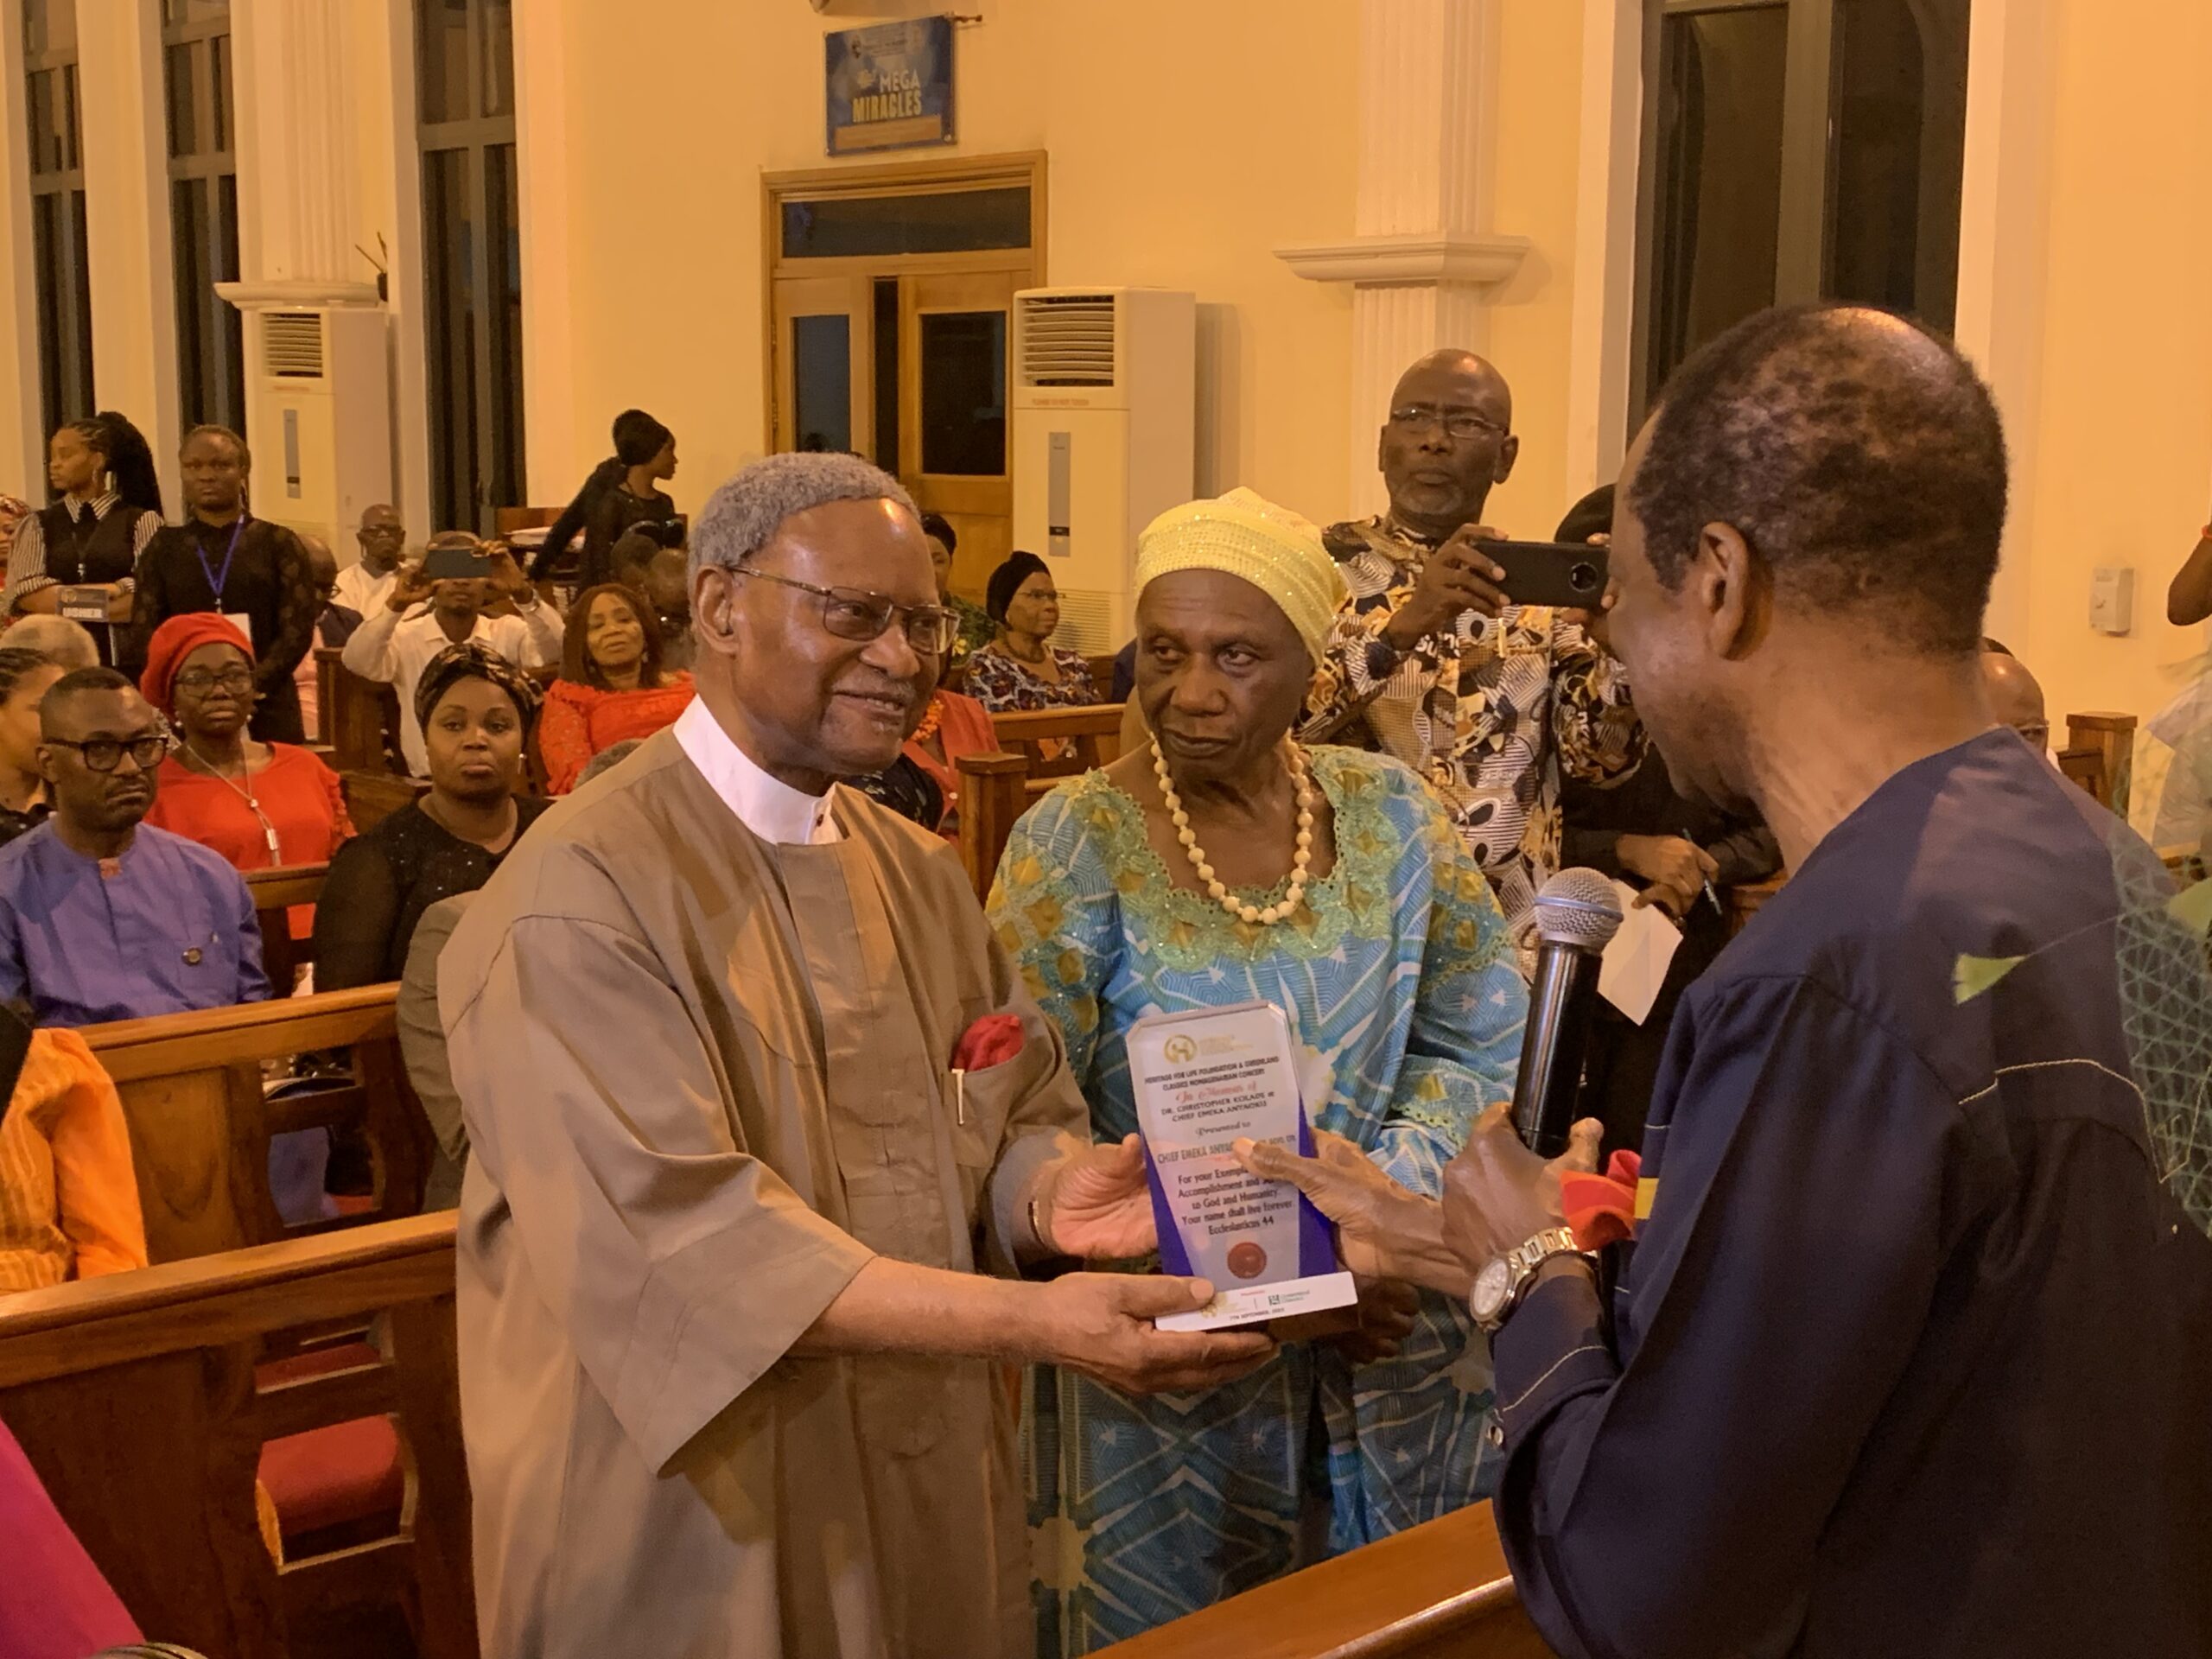 Mr Anyaoku receives an award at the event on Thursday 